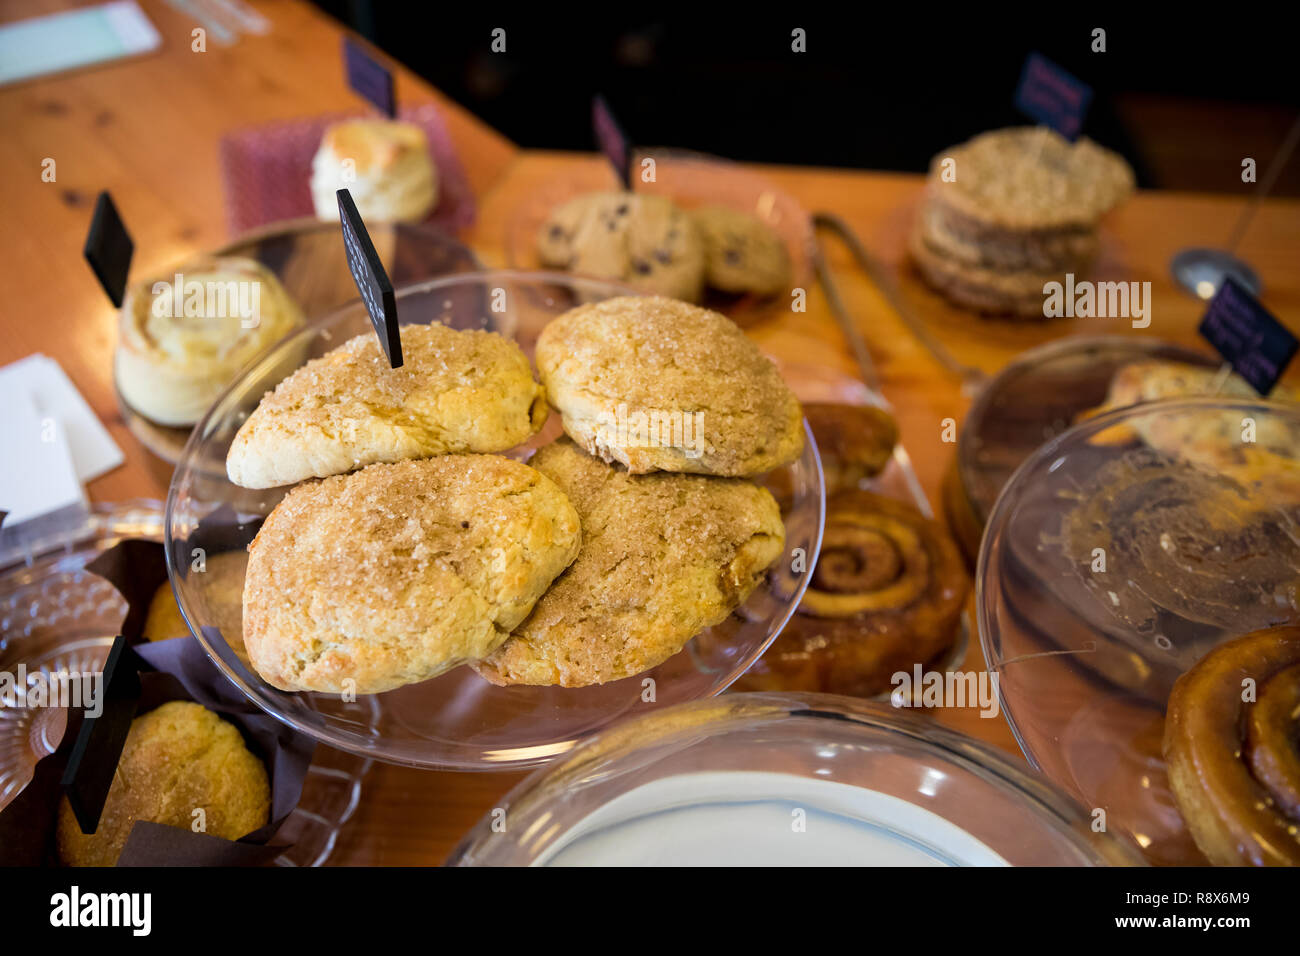 Handmade Scones at Coffee Shop Featuring Bakery Items Stock Photo